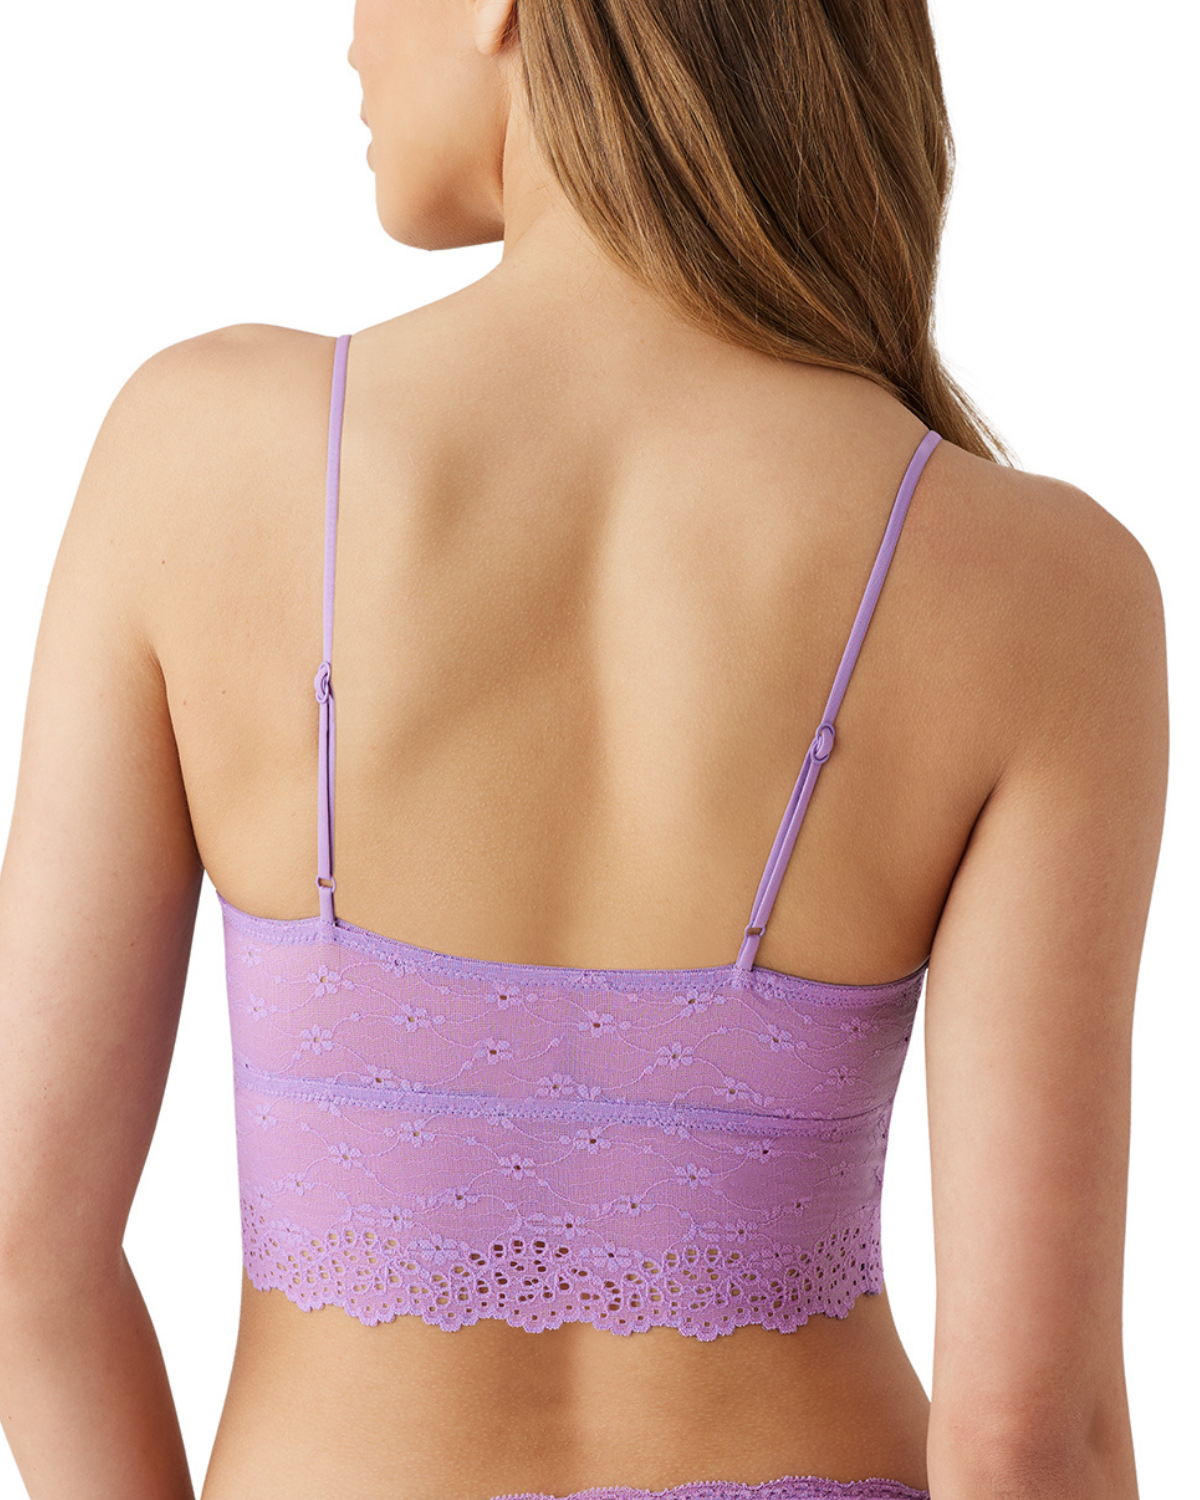 B. Tempt'd by Wacoal Inspired Lace Eyelet Bralette (More colors